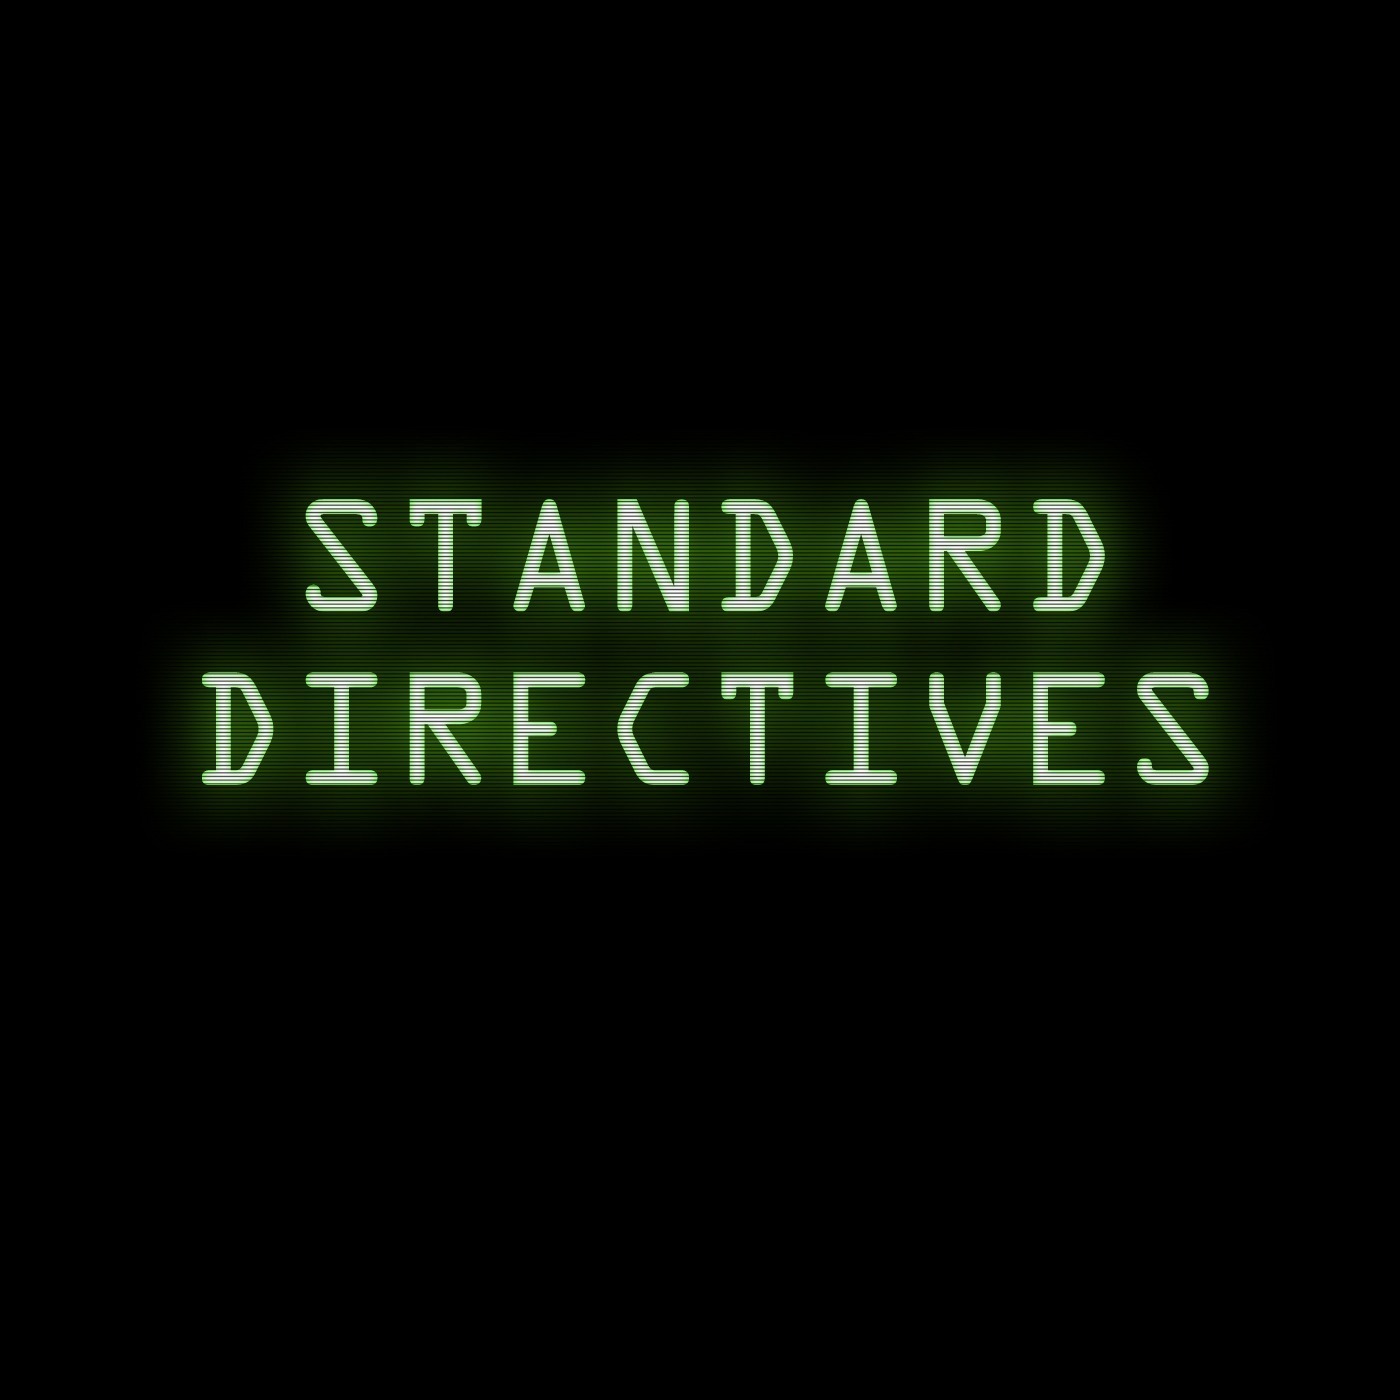 Standard Directive 013: If You HAVE To Say Something, Ask an Earnest Question